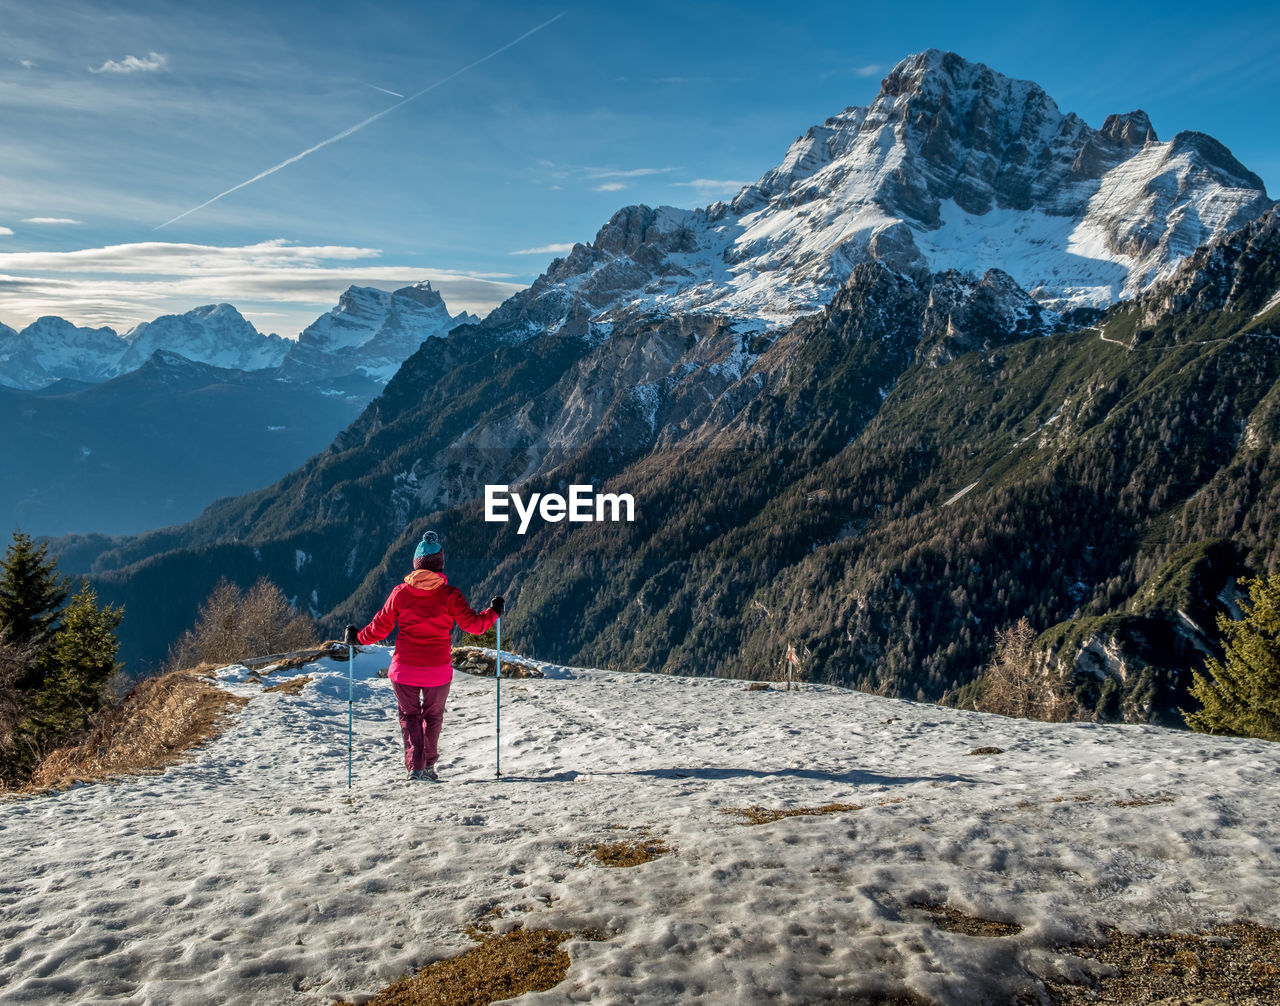 Rear view of woman hiking on snowcapped mountain against sky